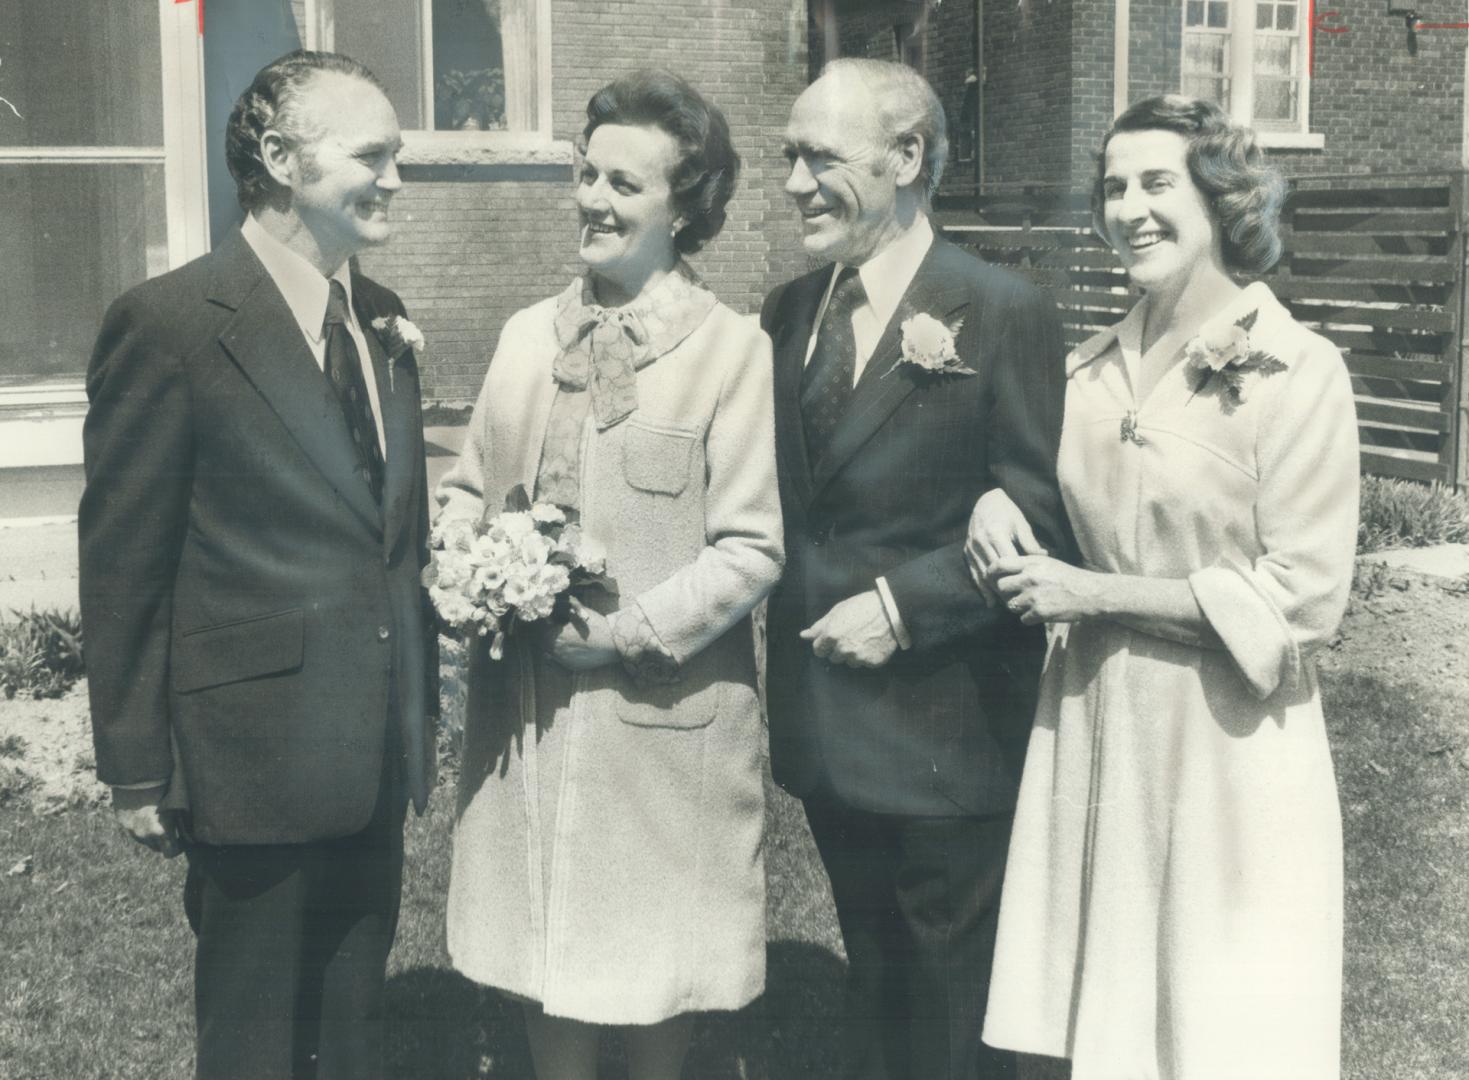 On honeymoon in Mexico. After their wedding in Toronto yesterday, Privy Council president Mitchell Sharp (second from right), 64, and Jeanette Dugal ((...)